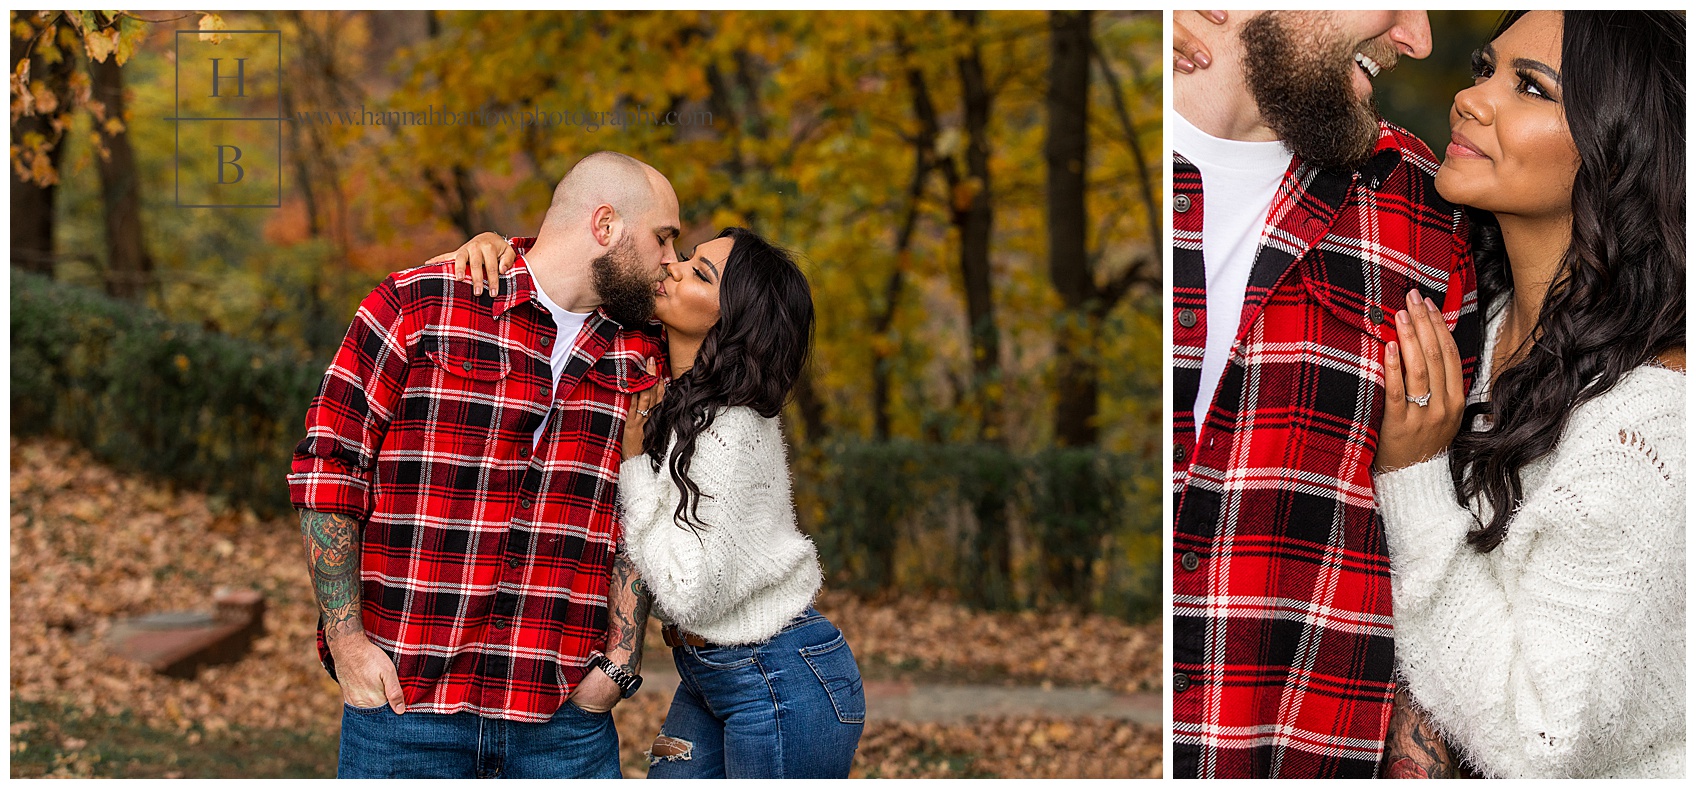 Fall Engagement Photos in the Forest